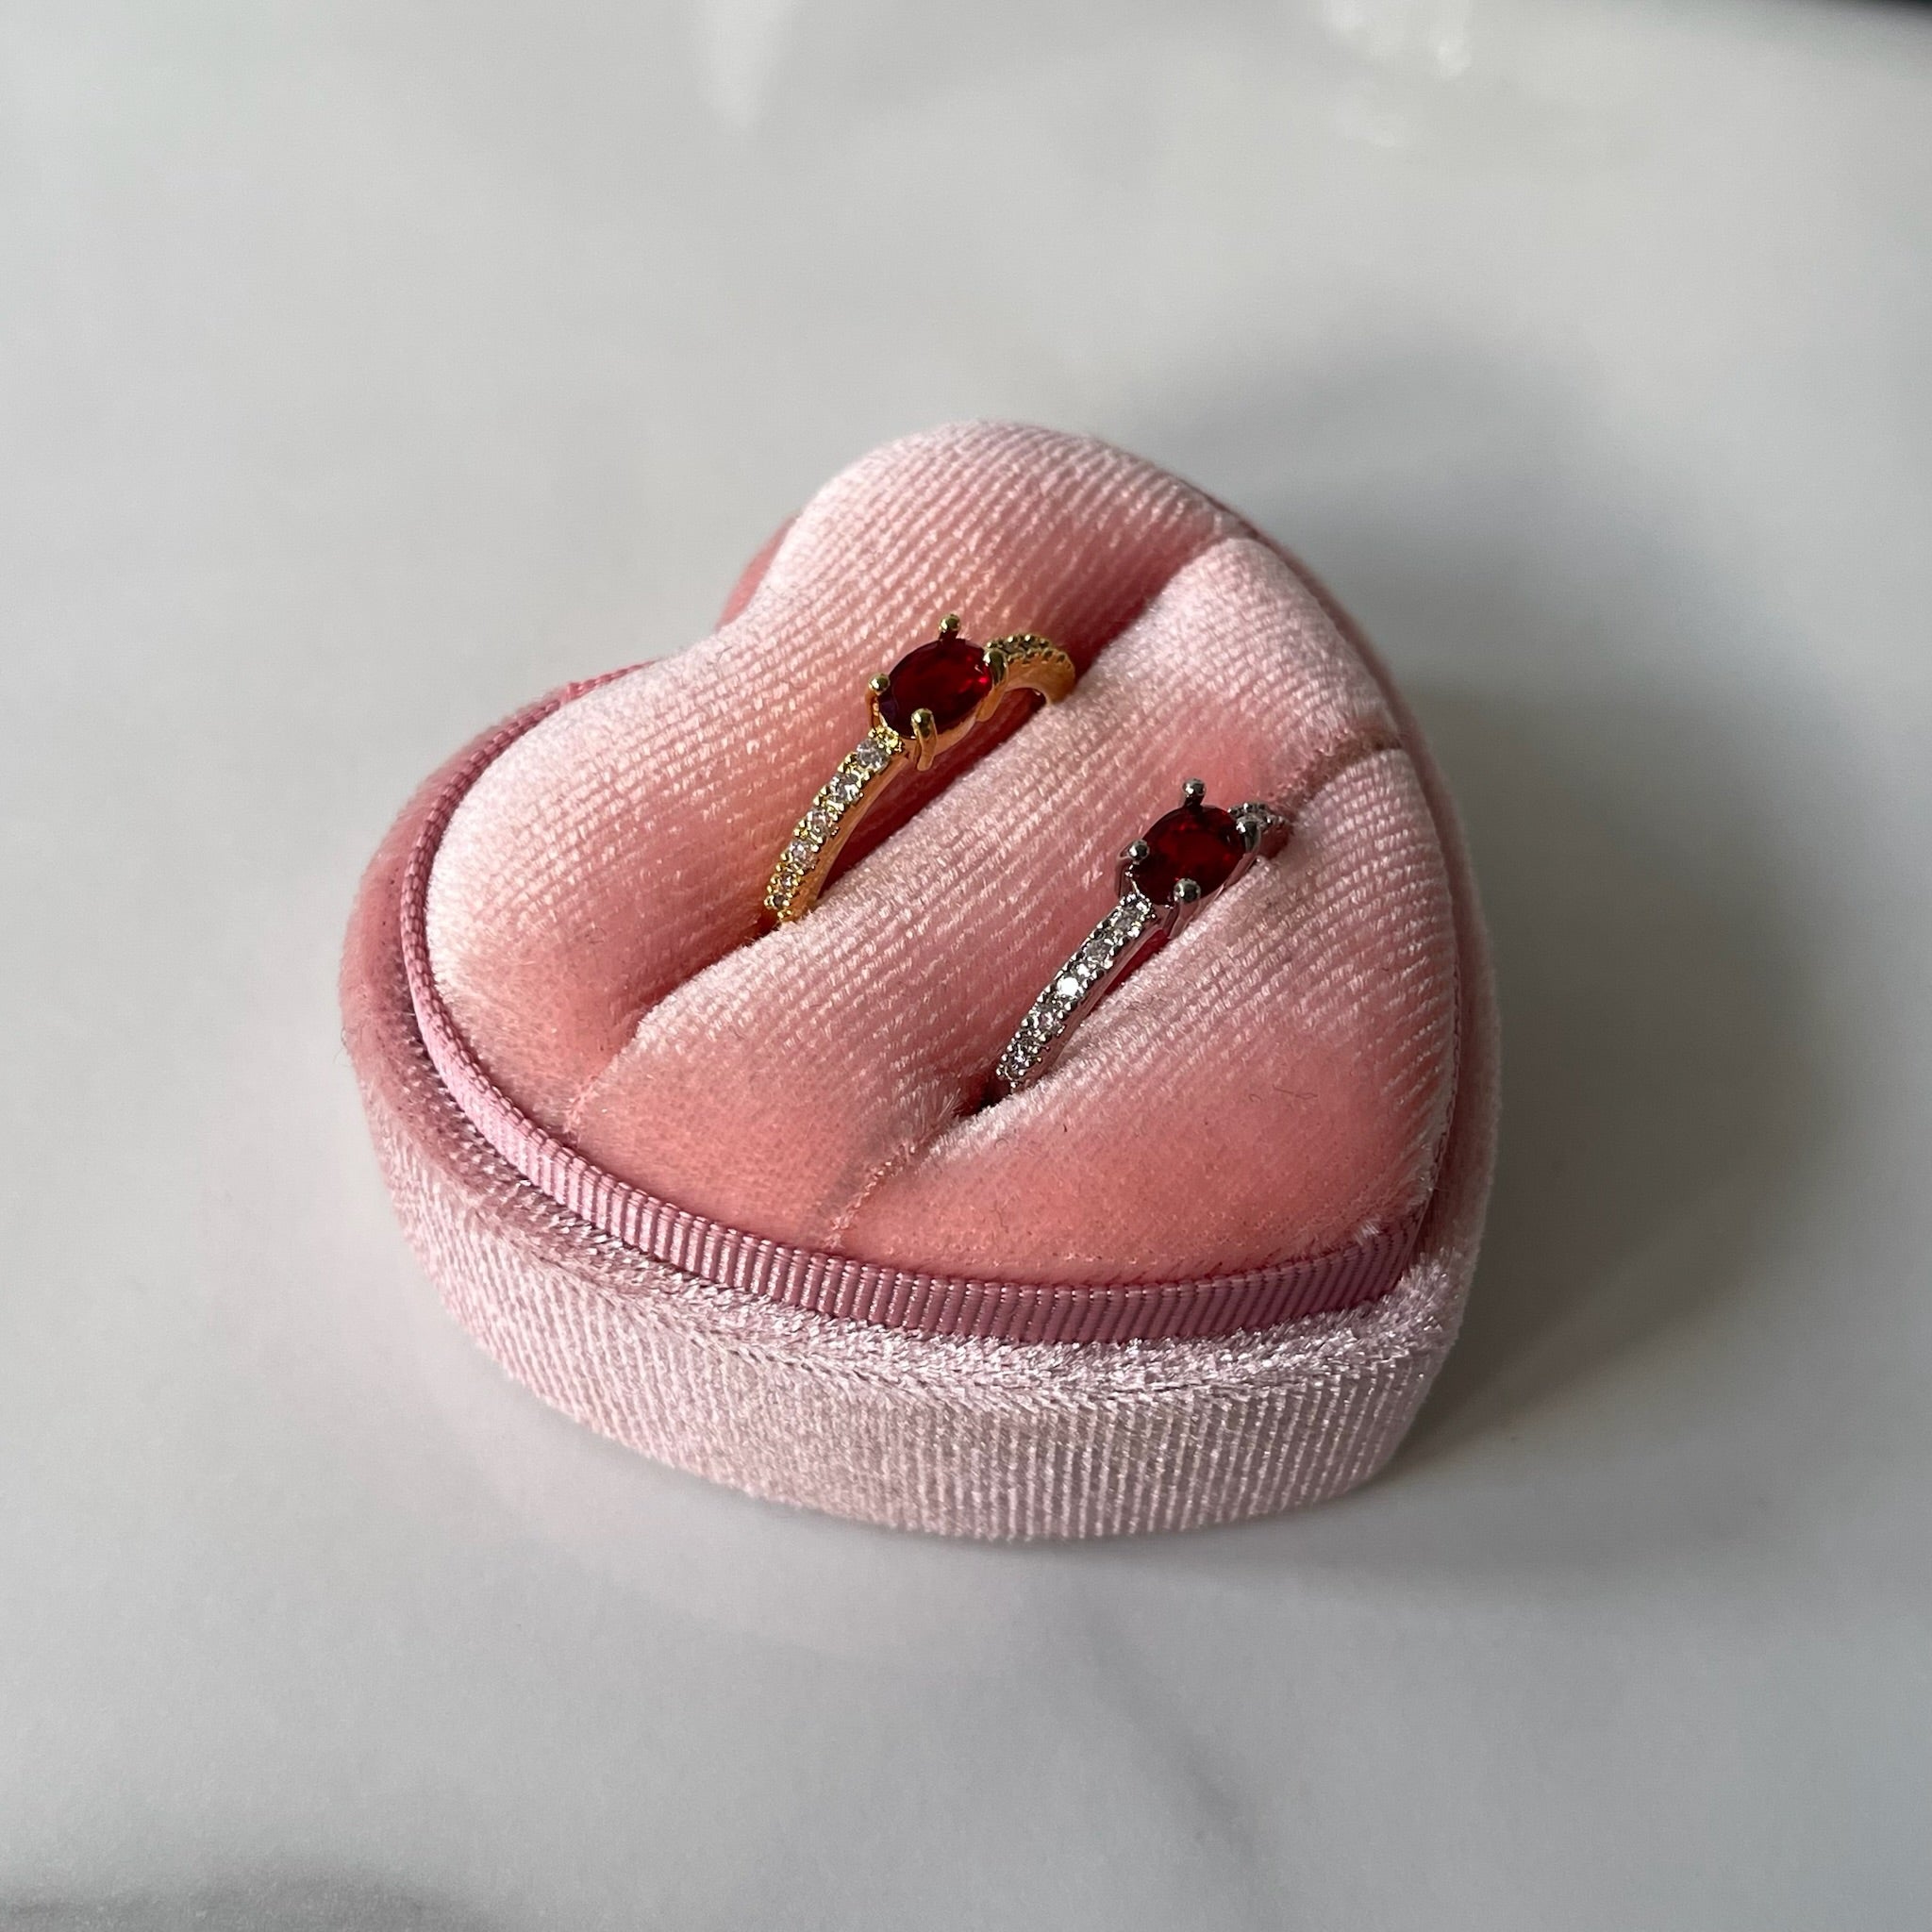 buttercup encrusted ring